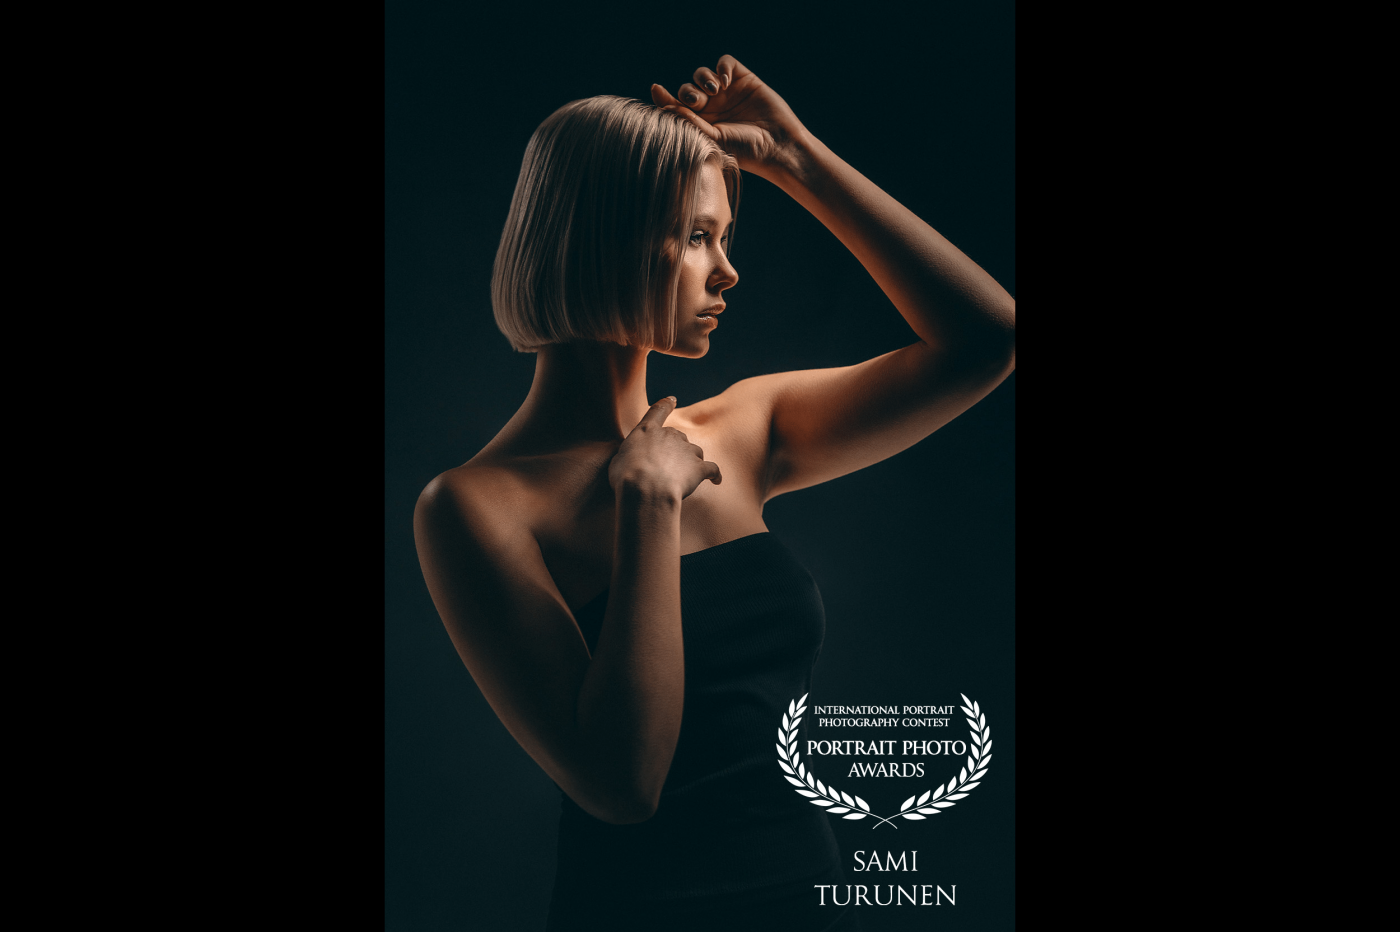 Shot with a stripbox & grid as a main light and led tube as a backlight / backlight to create a rim behind a model. Our goal was to achieve perfect timeless moment and simplicity in frame. Model is an elegant Matilda Wirtavuori.